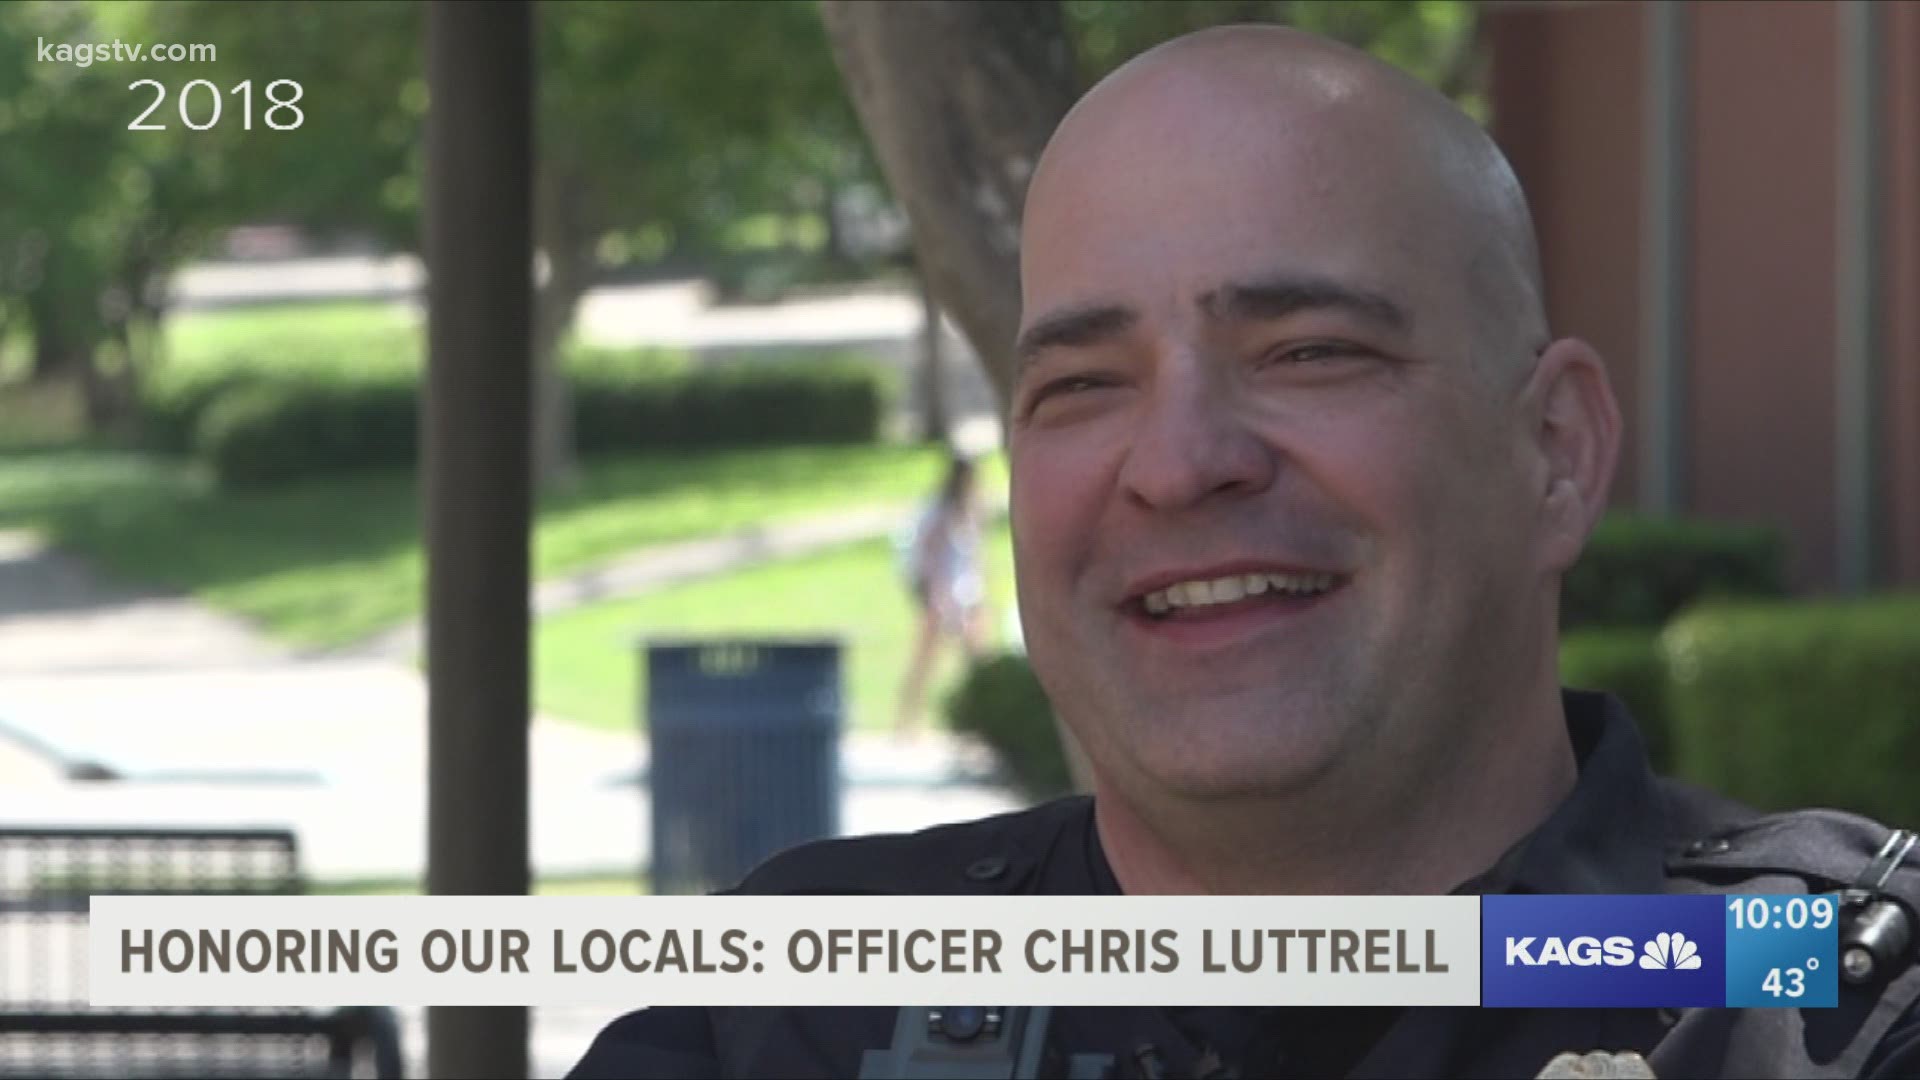 How a local police officer worked to make a difference on campus and the lives of its students.